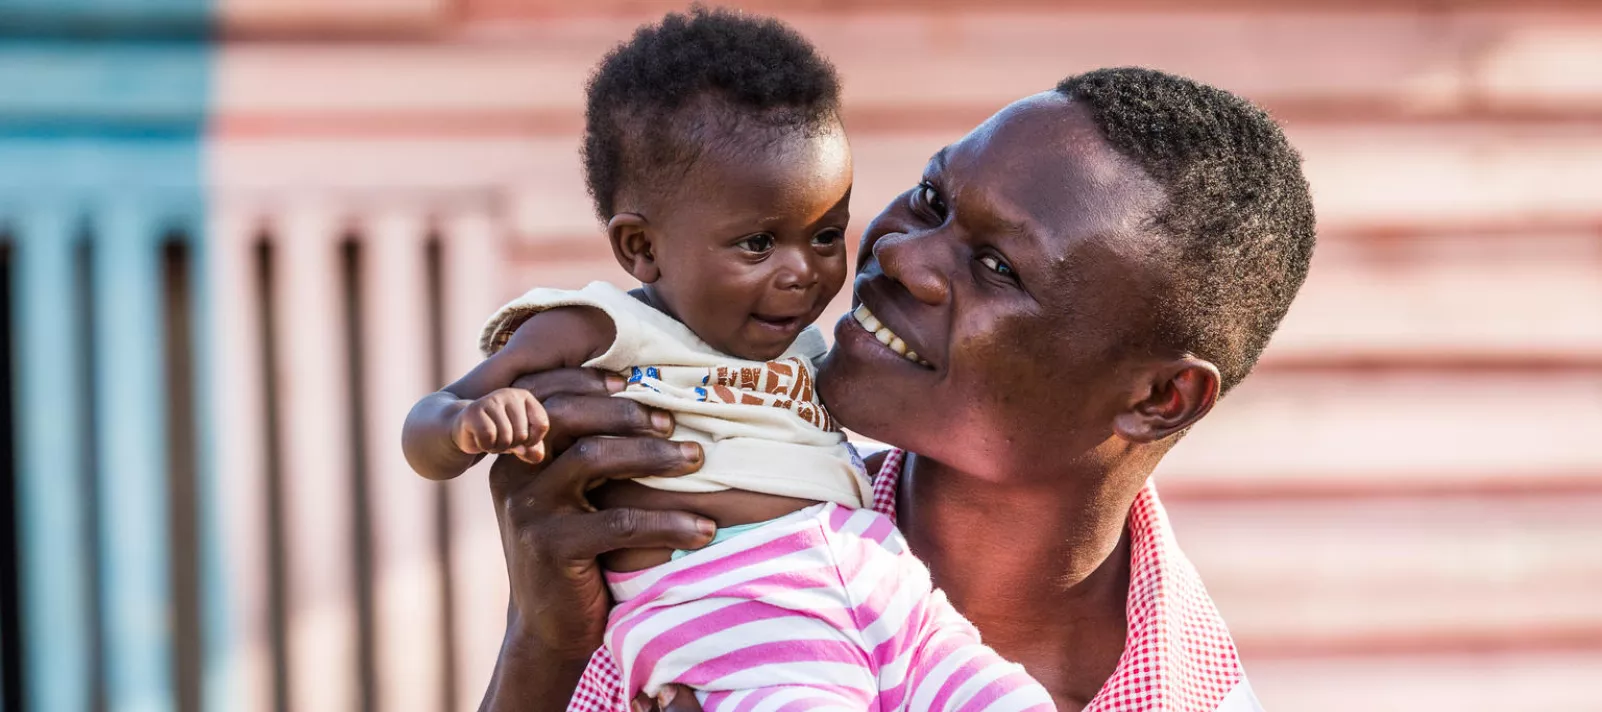 On 15 September 2019, a father holds his child in Bétou, Republic of Congo.